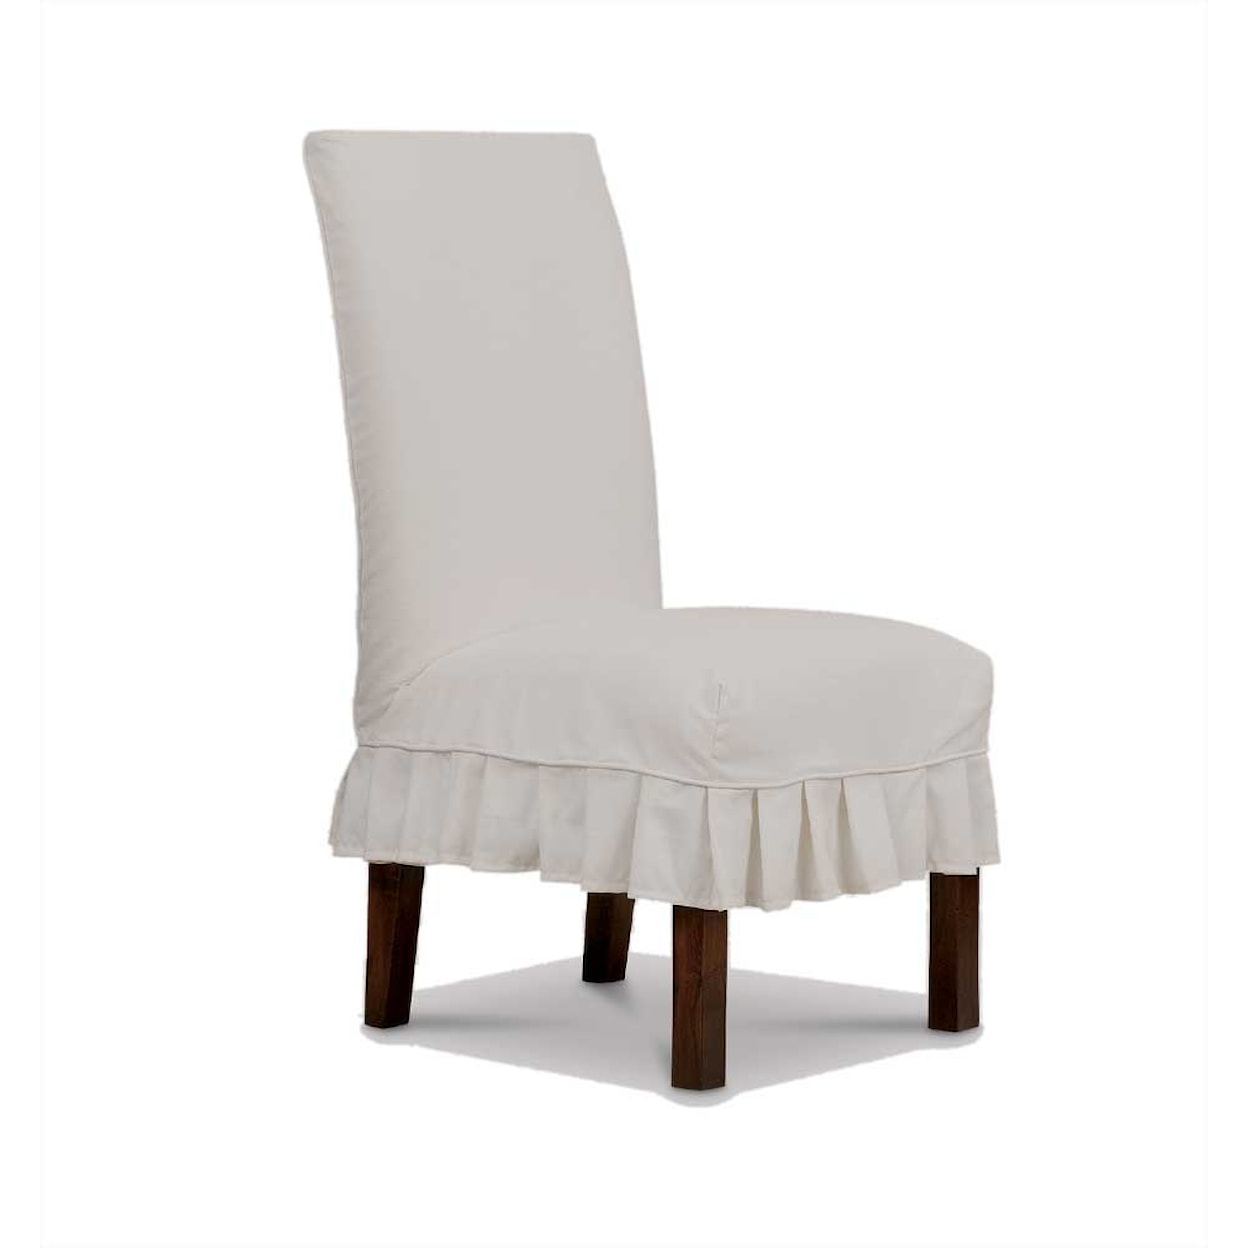 Miles Talbott Washable Wonders Betsy and Lucy Slipcovered Dining Chair